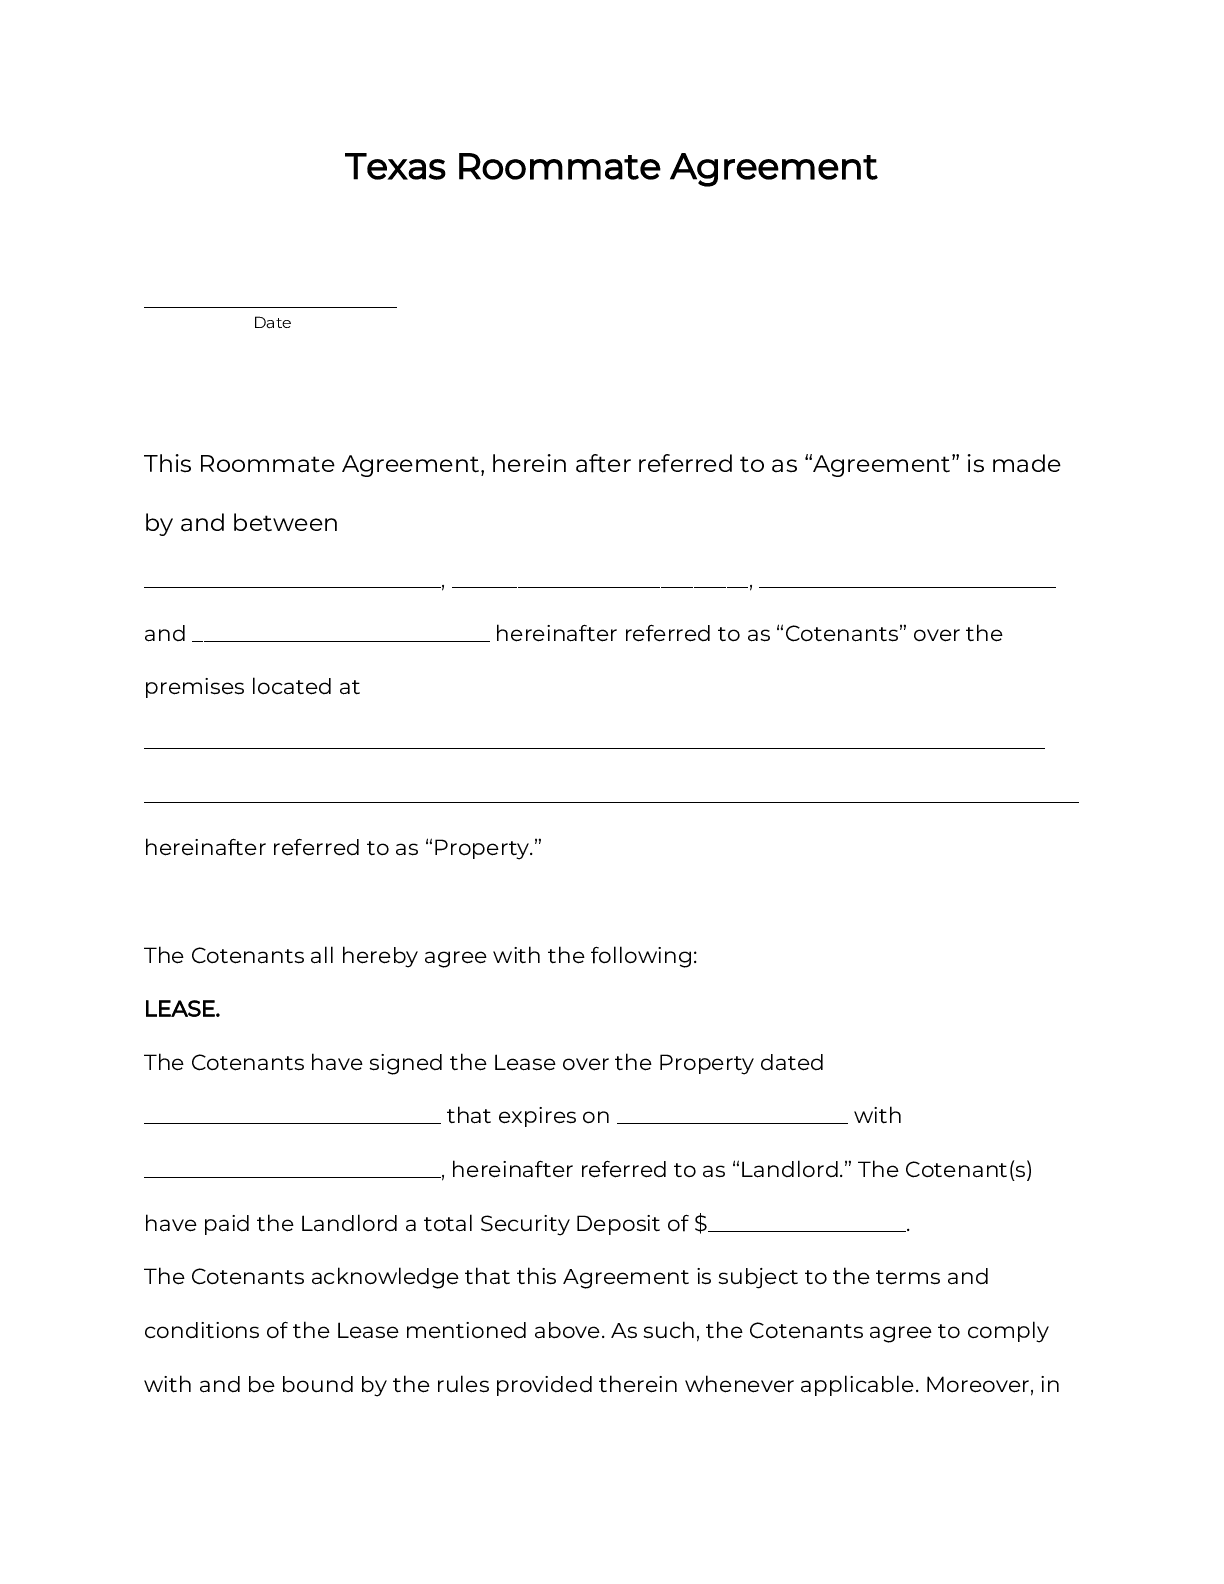 OFFICIAL Texas Room Rental Agreement: Roommate Form [22]  PDF Regarding private rental agreement template